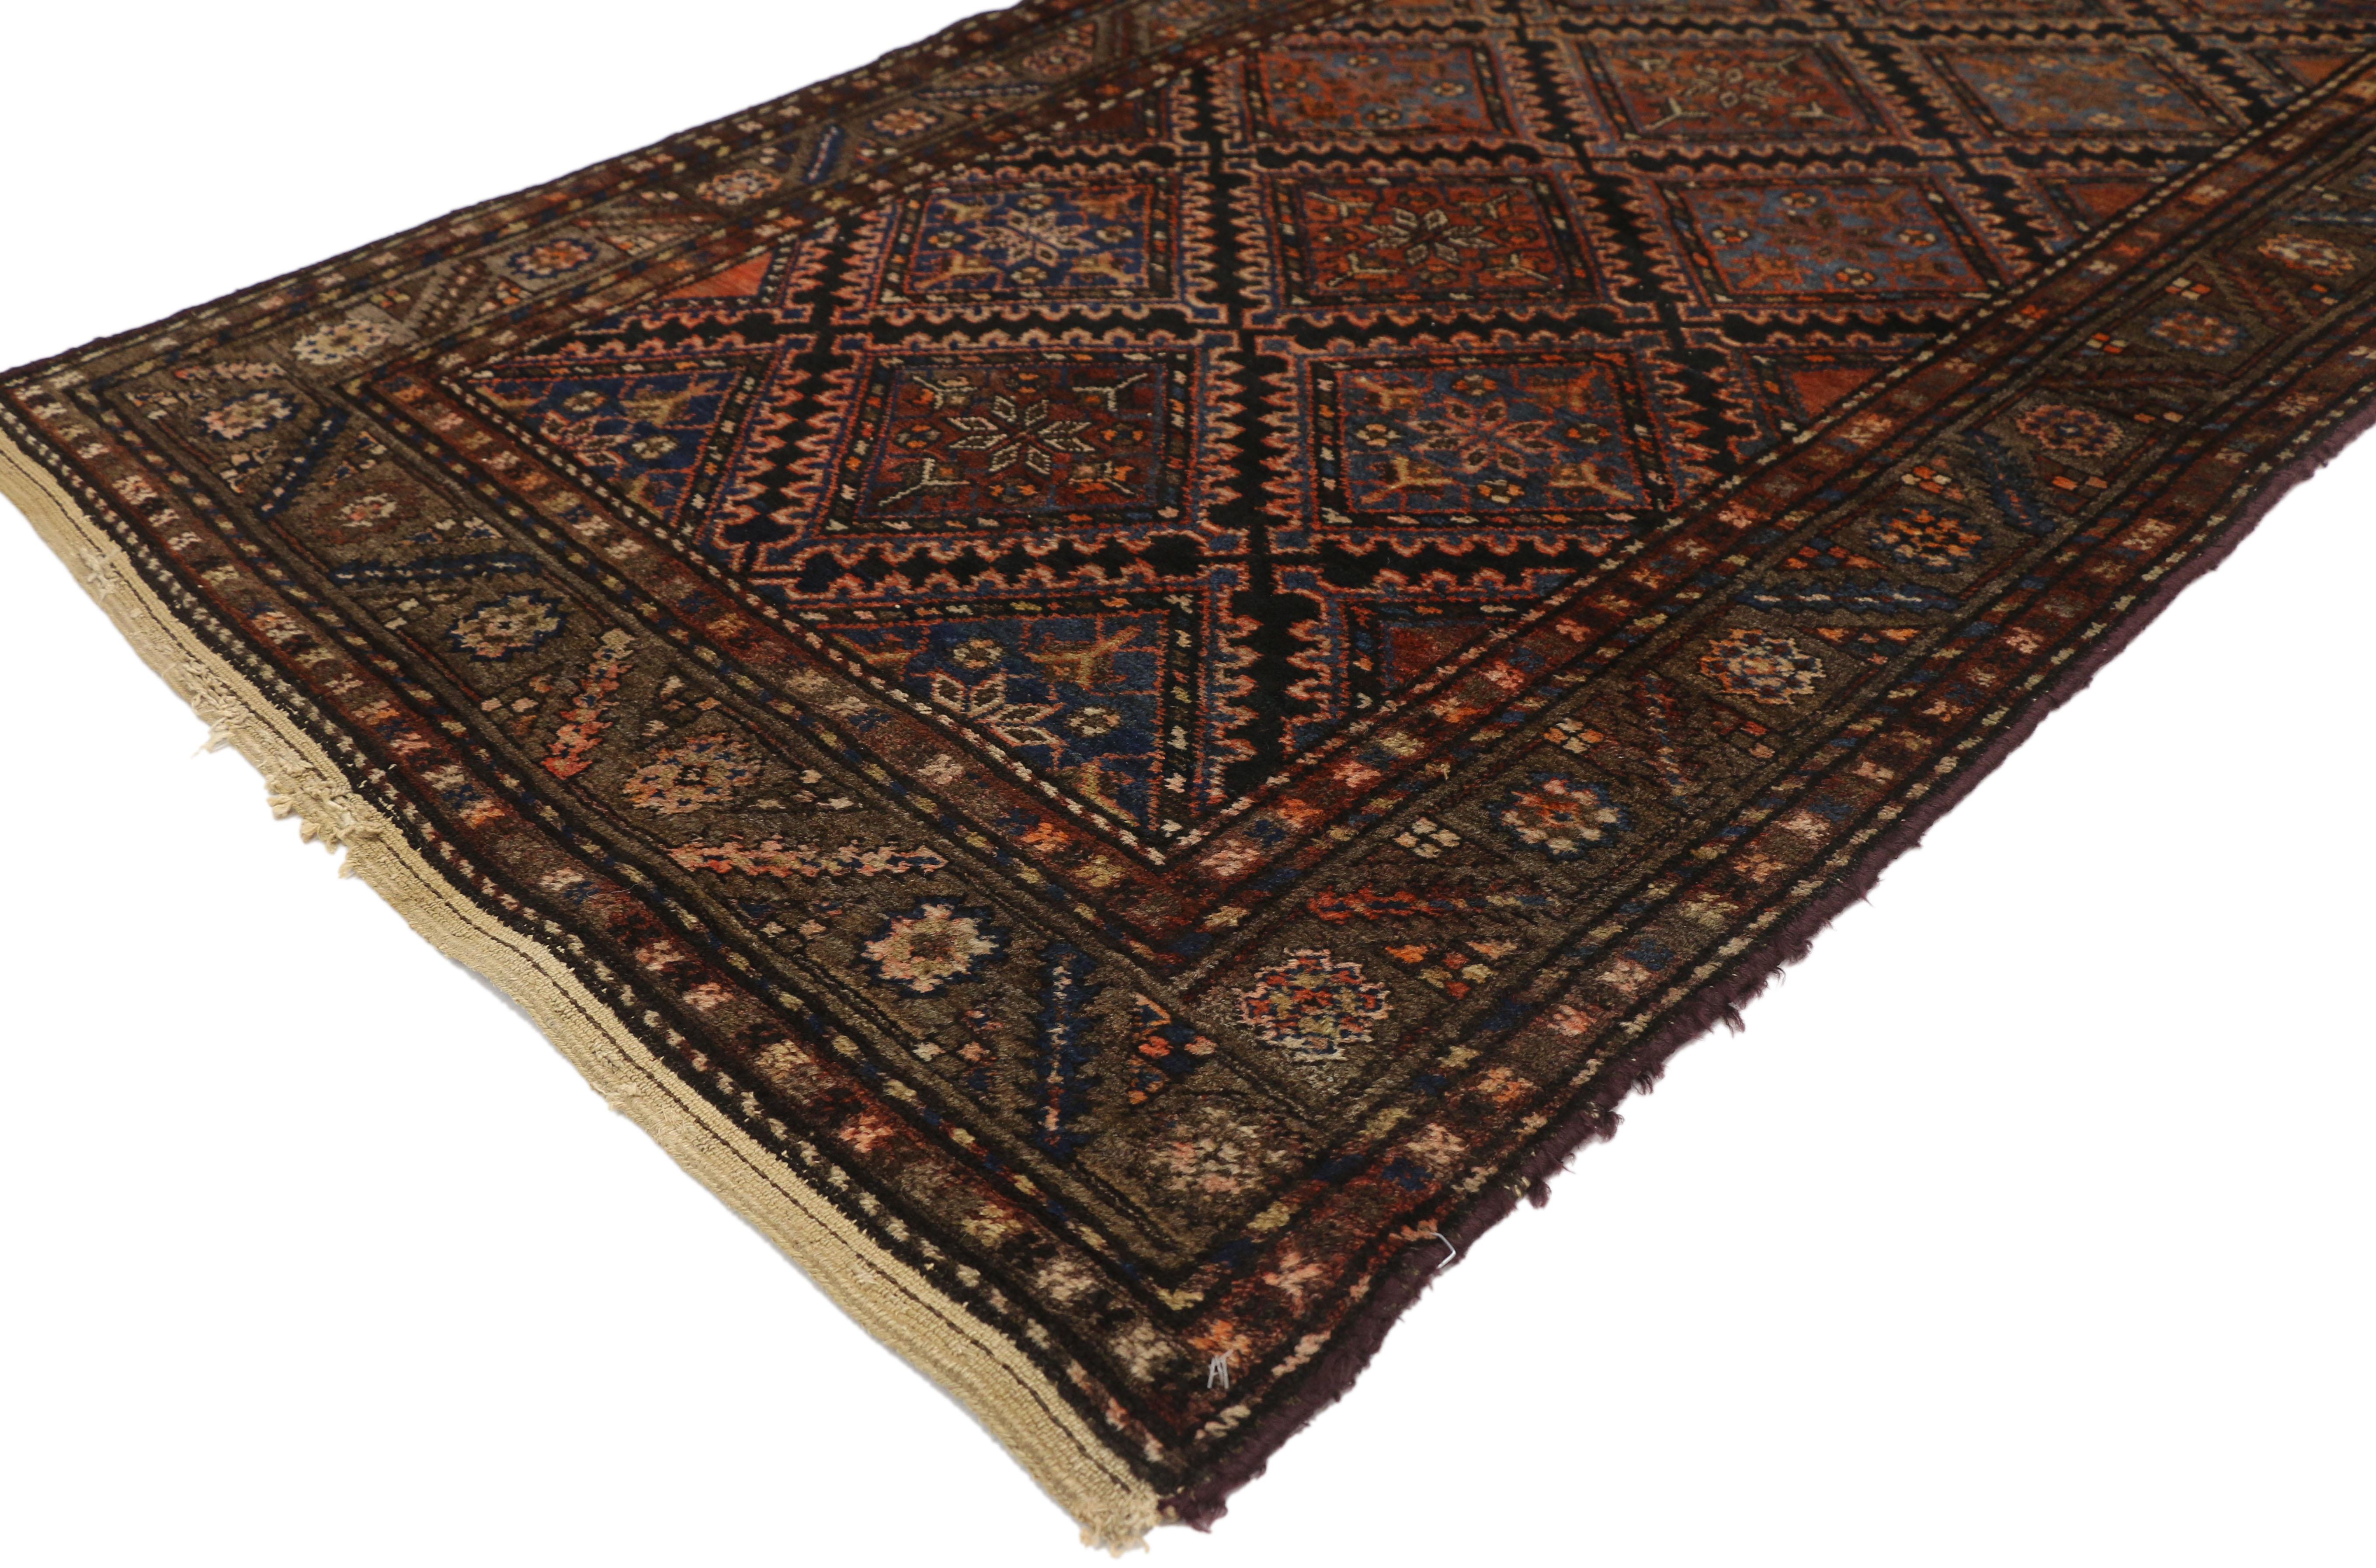 72457, antique Persian Hamadan rug with Mid-Century Modern tribal style. With a timeless design aesthetic and mid-century modern style, this hand-knotted wool antique Persian Hamadan rug features a diamond lattice with a botanical pattern. It is